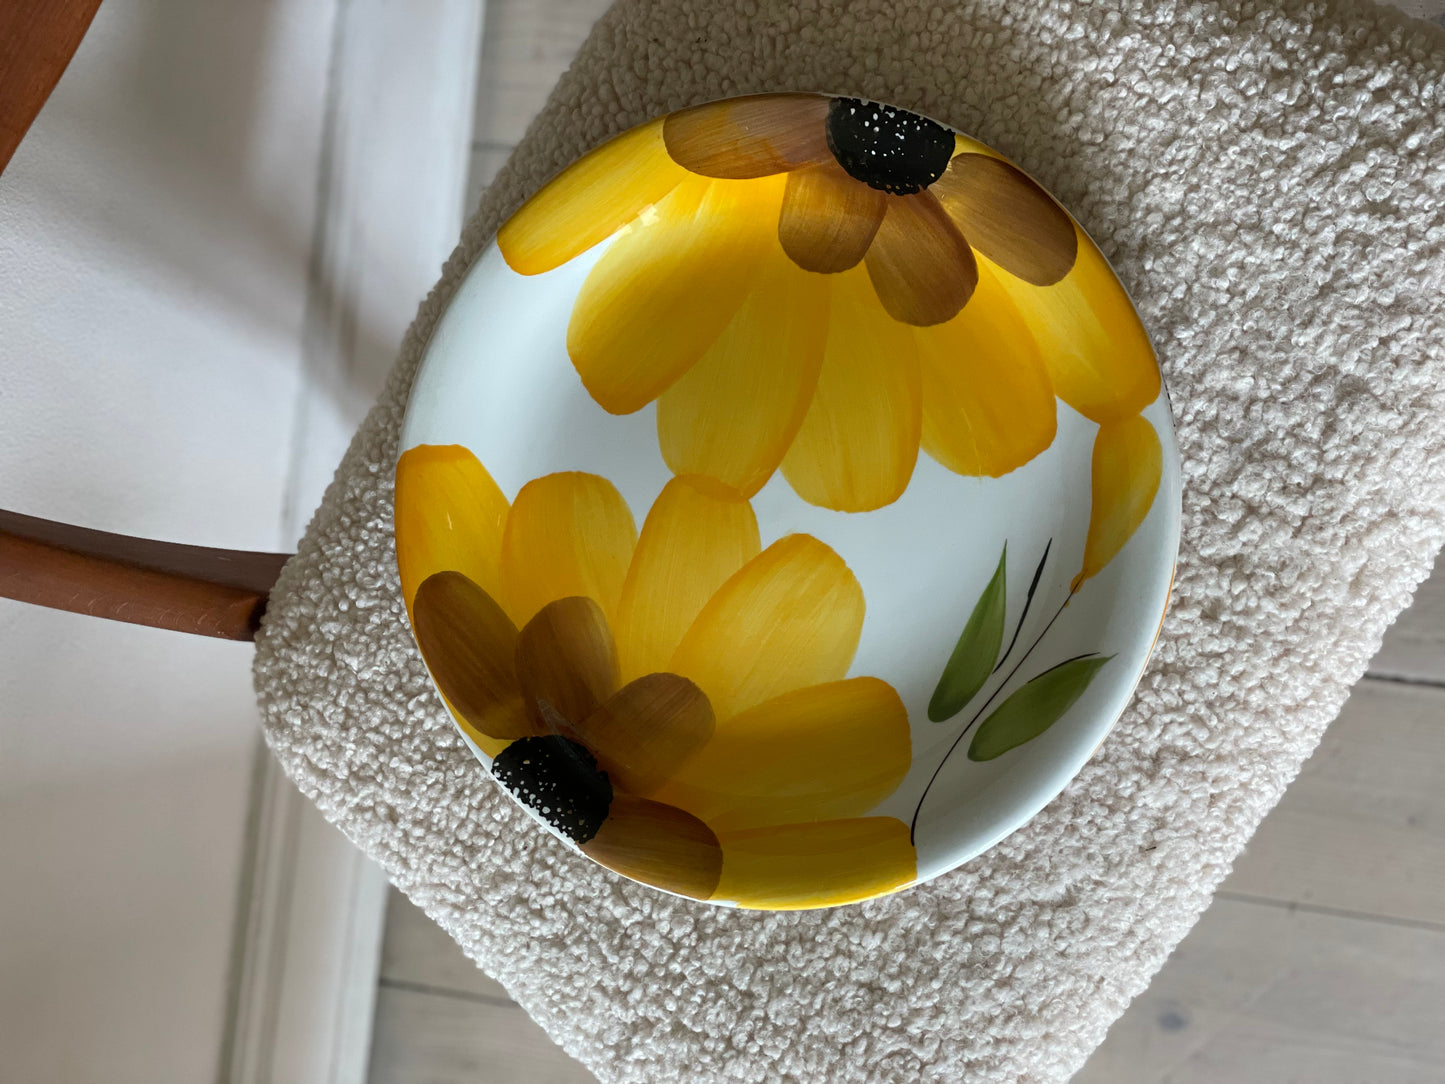 Italian dinner plates with yellow flowers